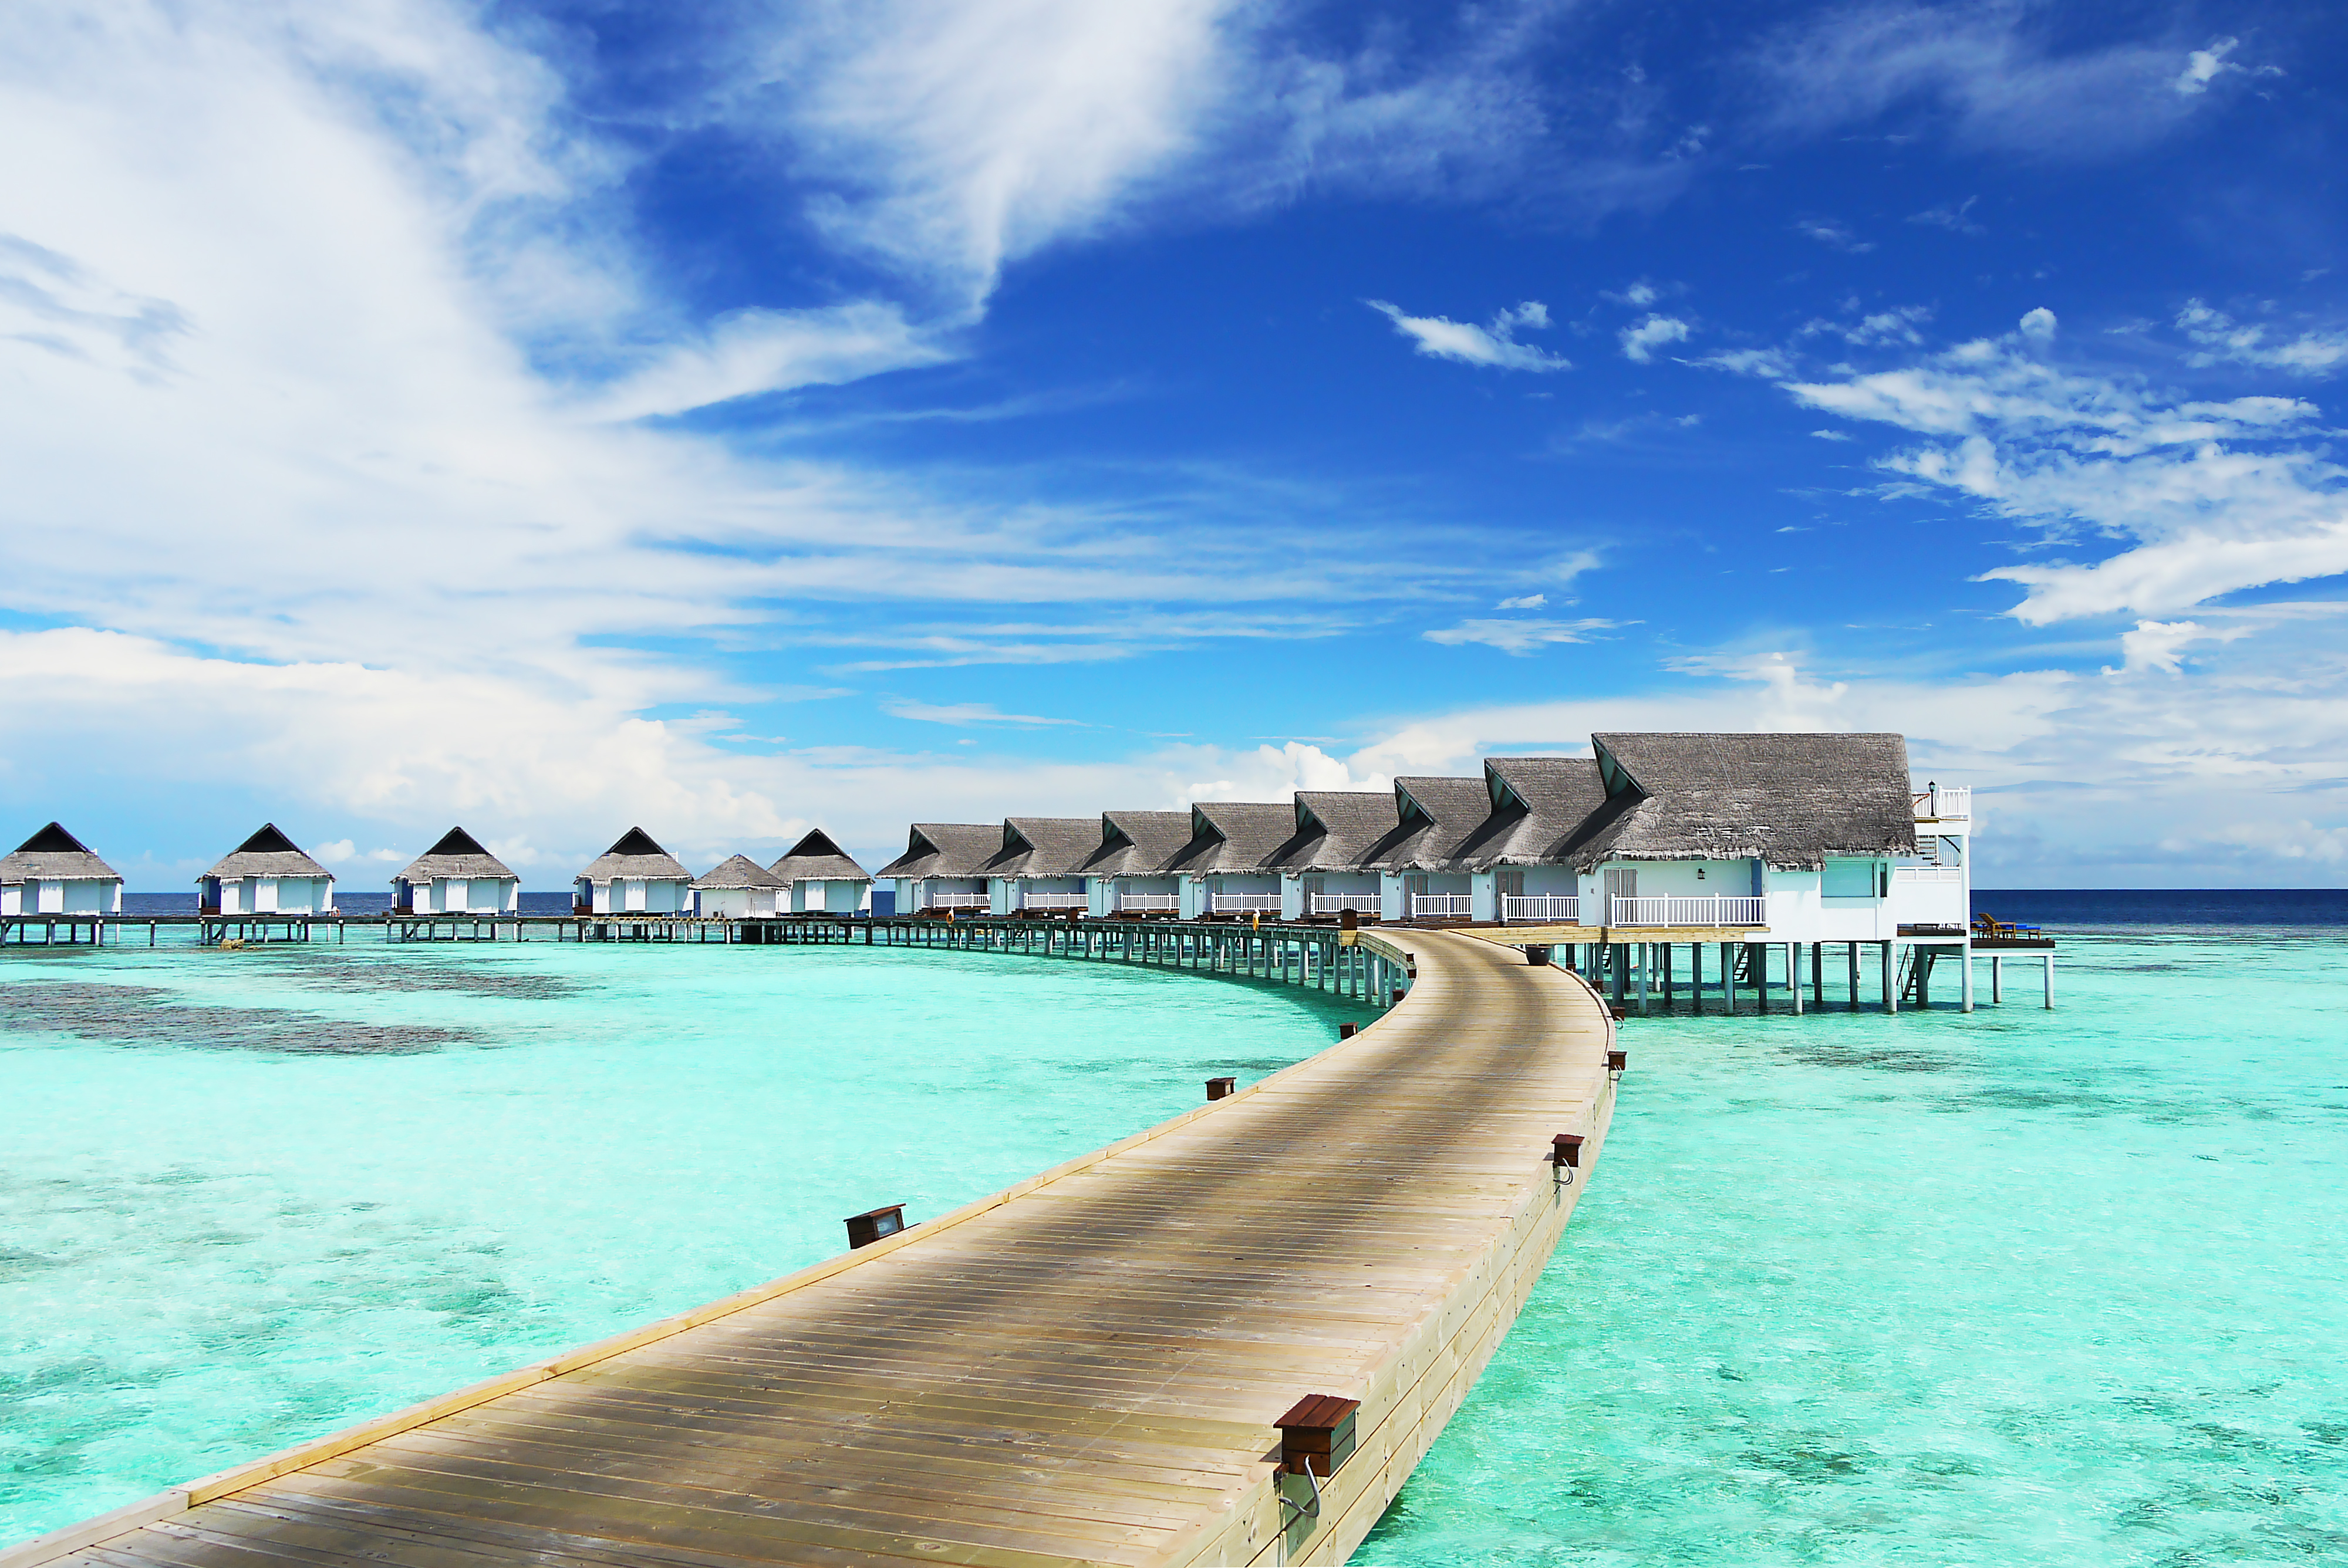 Maldives Overwater Bungalows